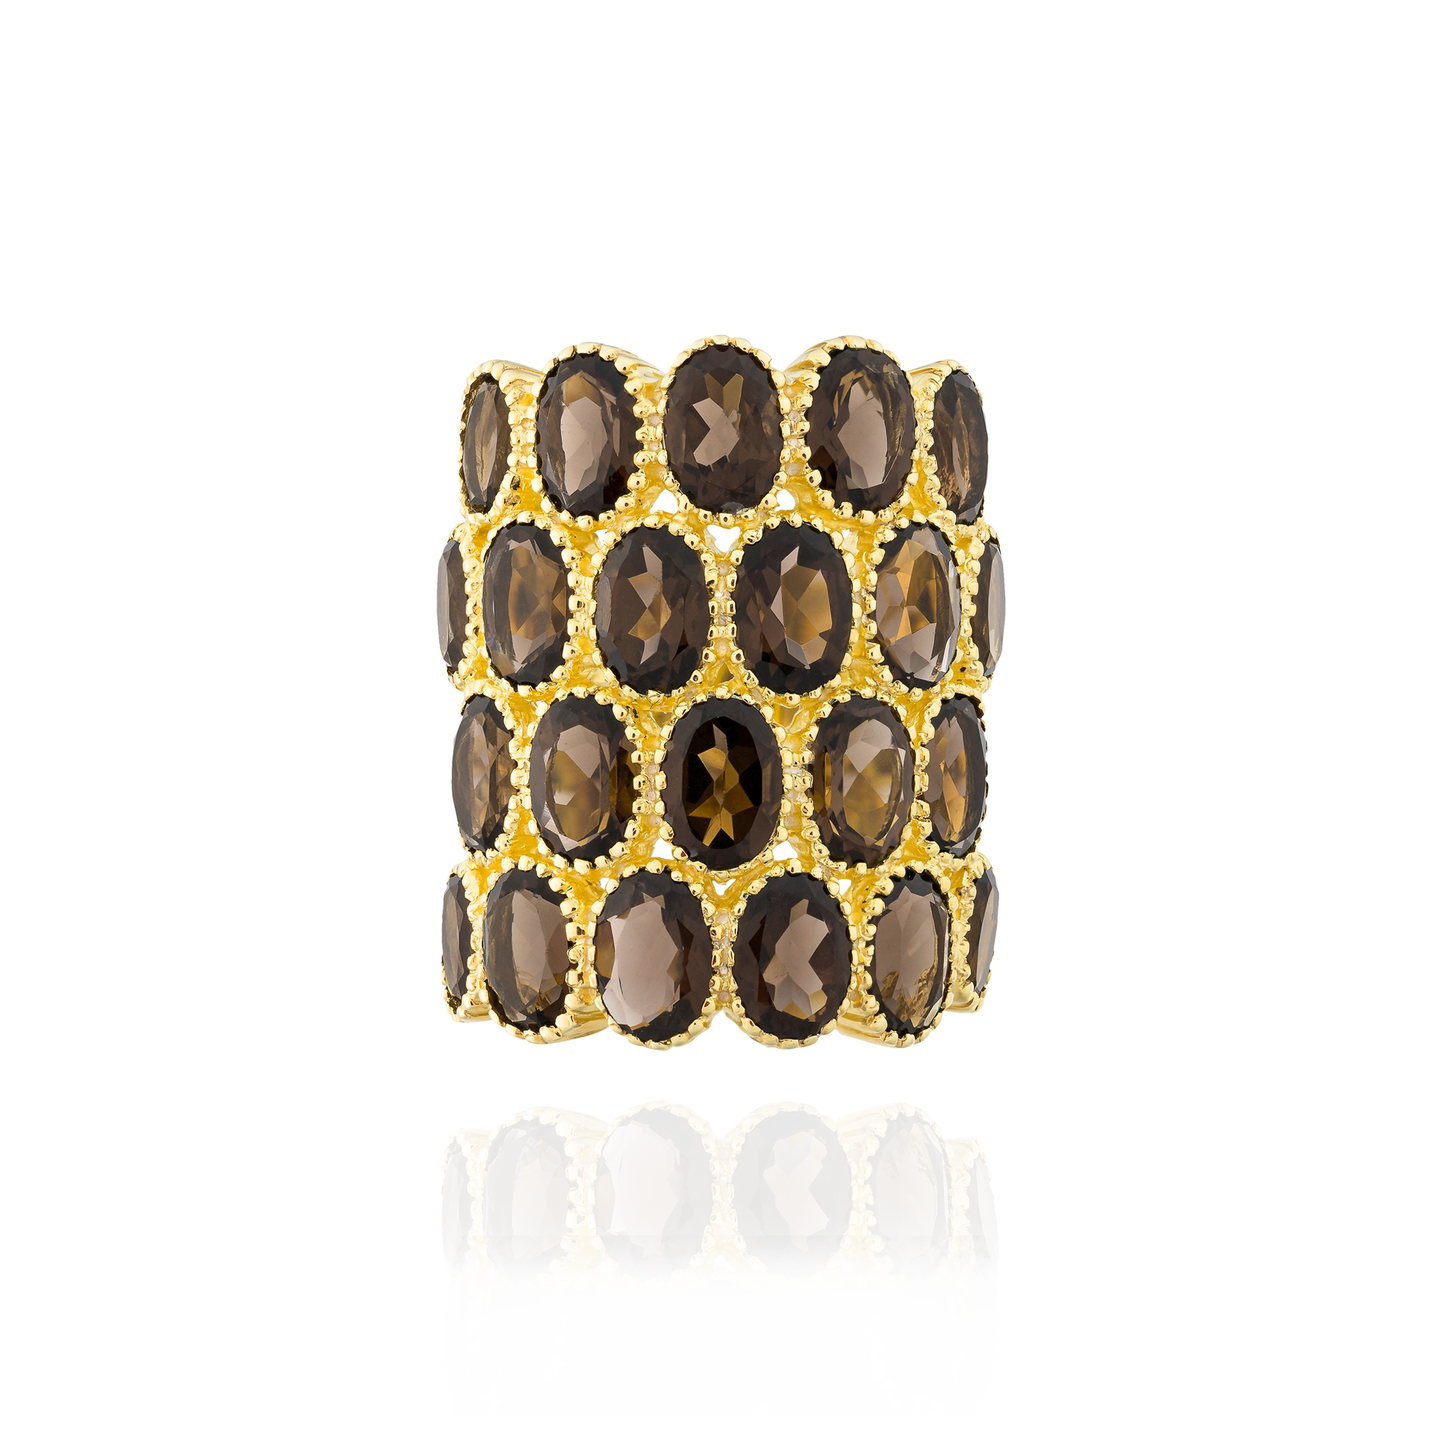 Load image into Gallery viewer, 925 Silver Ring plated in 18k Yellow Gold with Oval Cut Smoky Quartz
